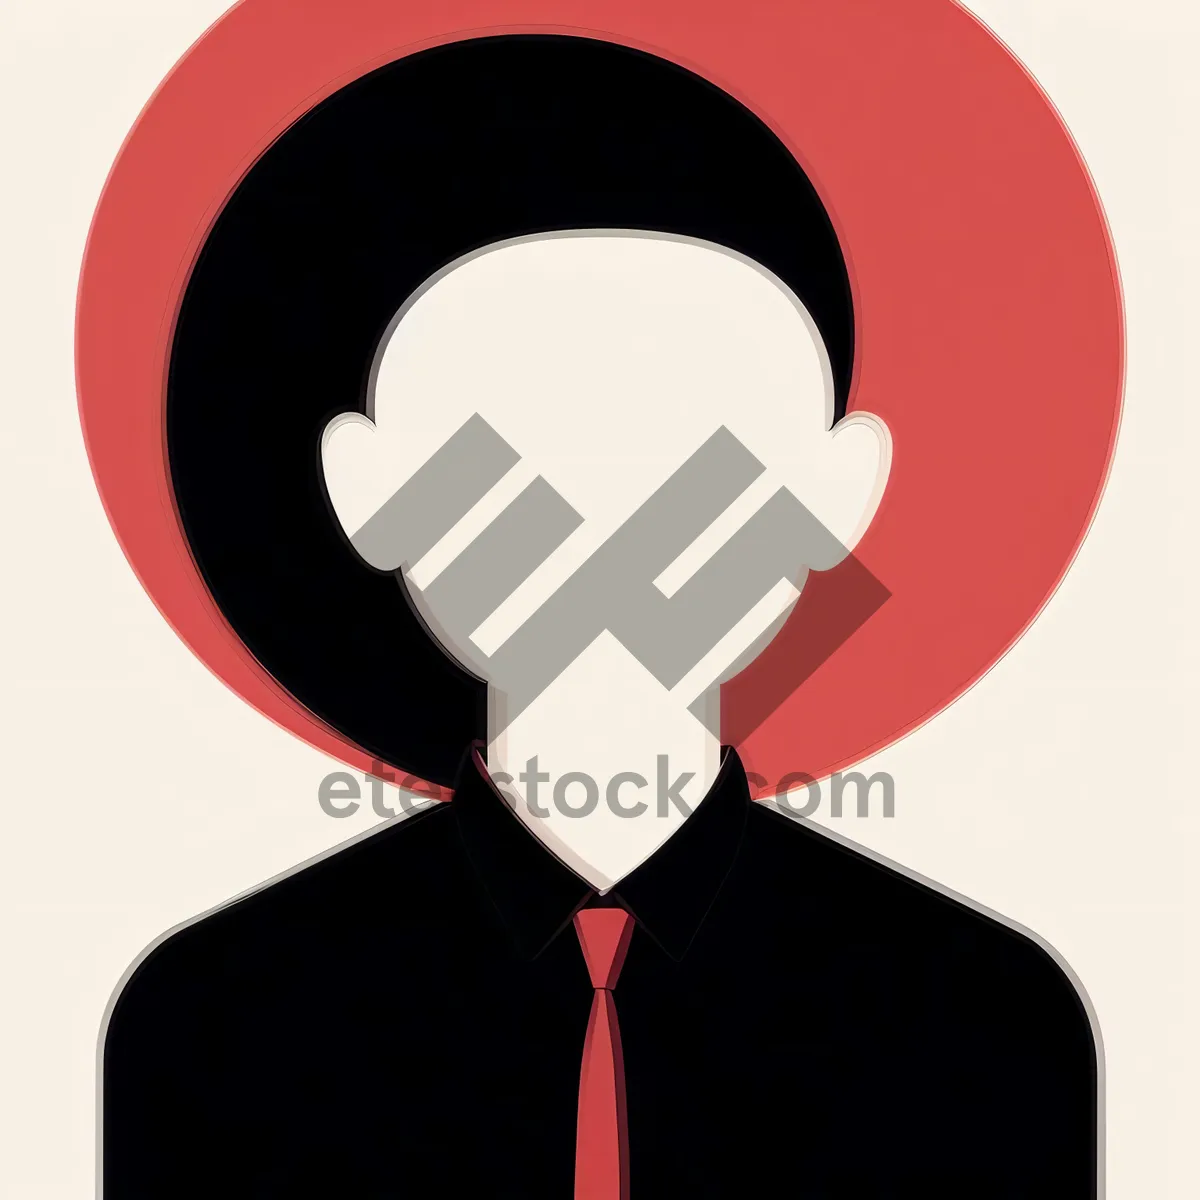 3D Business Icon with Man Holding Heart Symbol